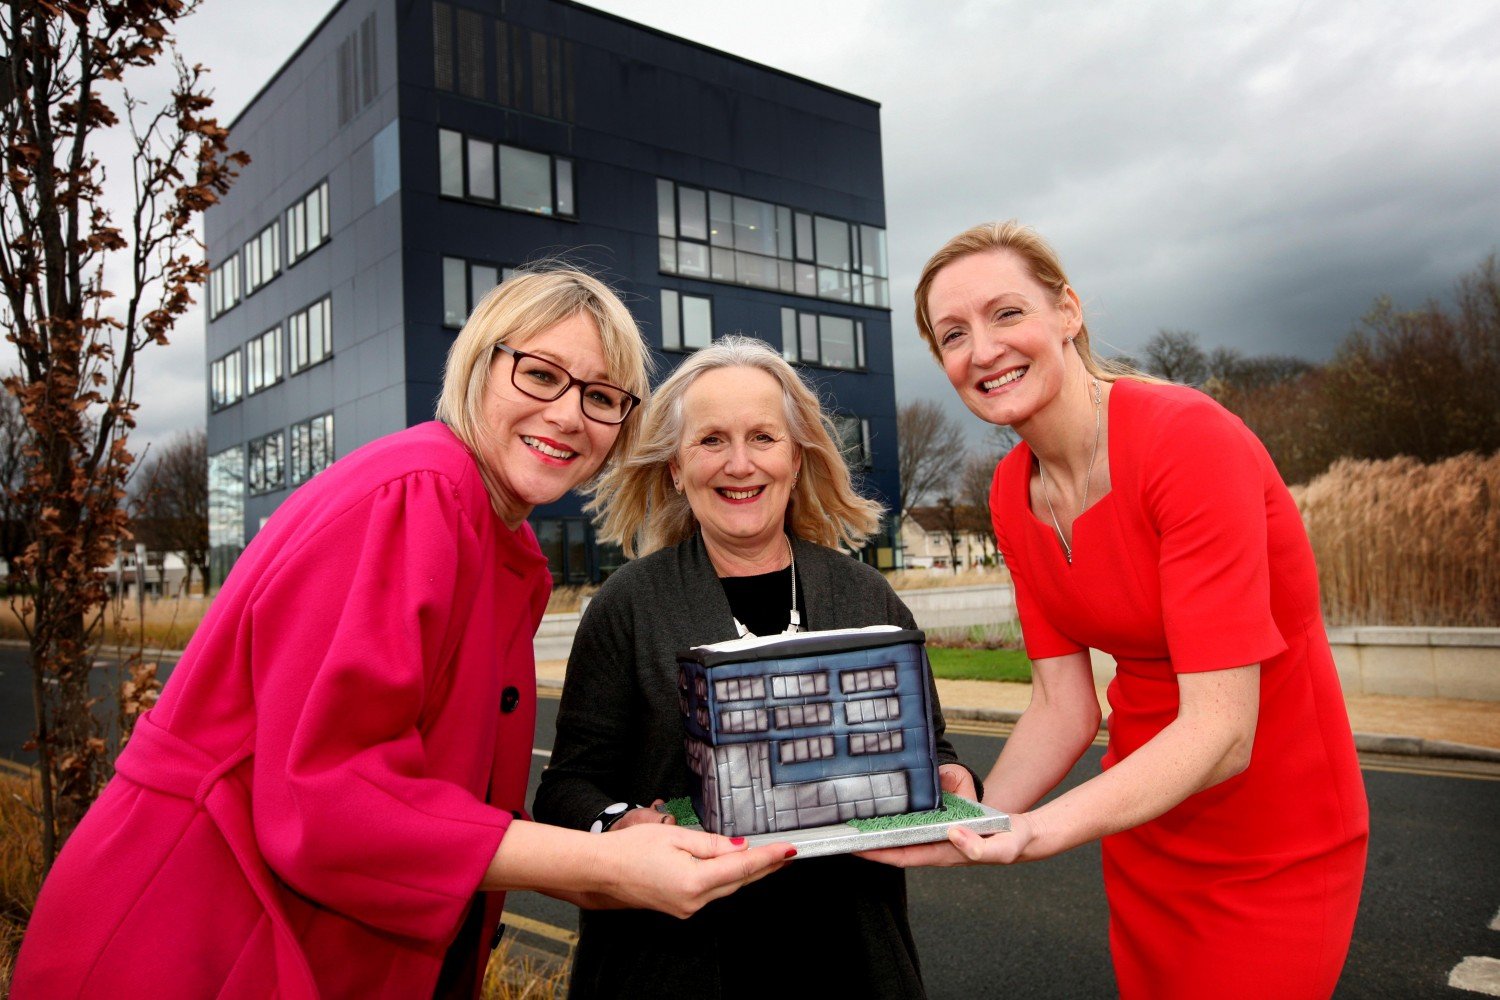 Jessica Fuller, Dr. Annie Doona and Ann Marie Phelan outside the Media Cube